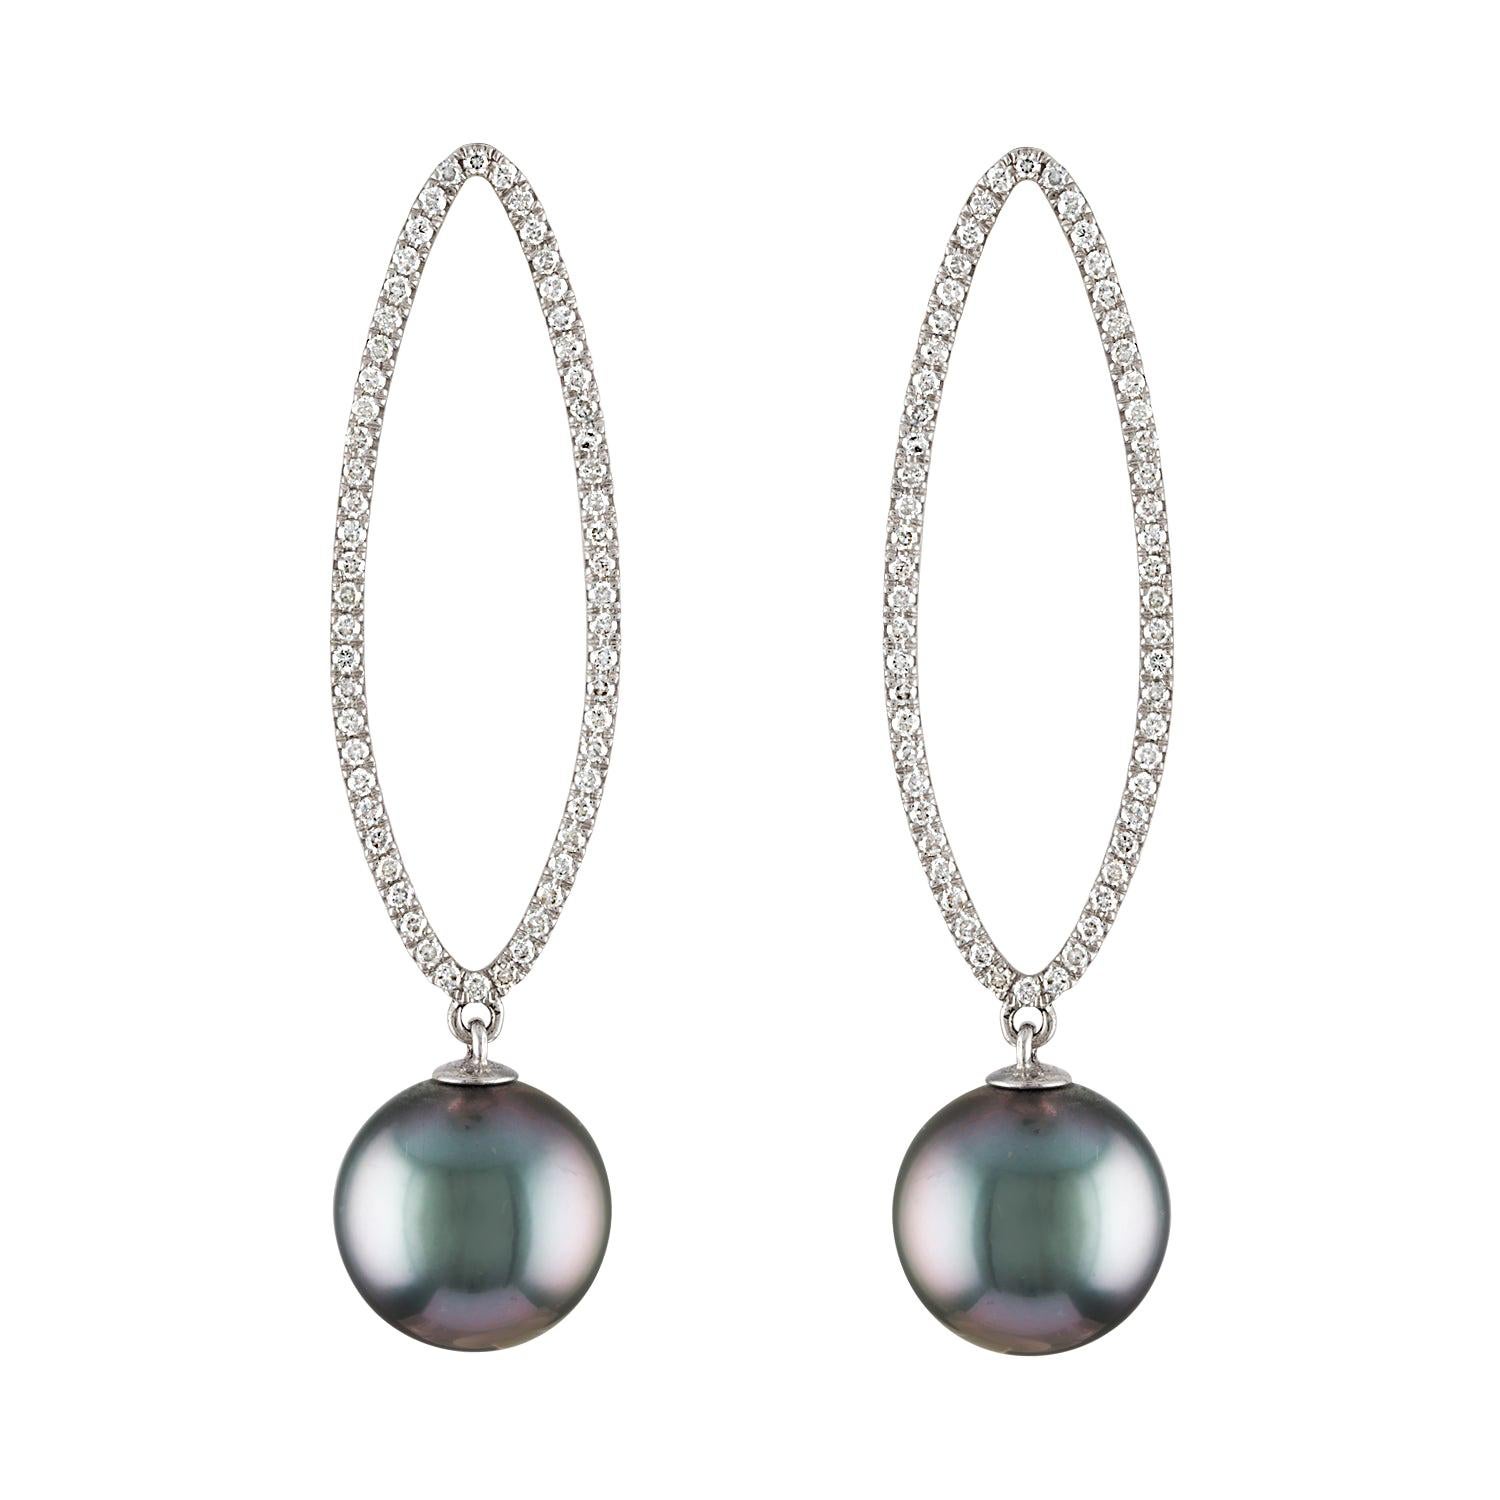 14K White Gold and Diamond Earrings with South Sea Tahitian Round Cultured Pearl For Sale